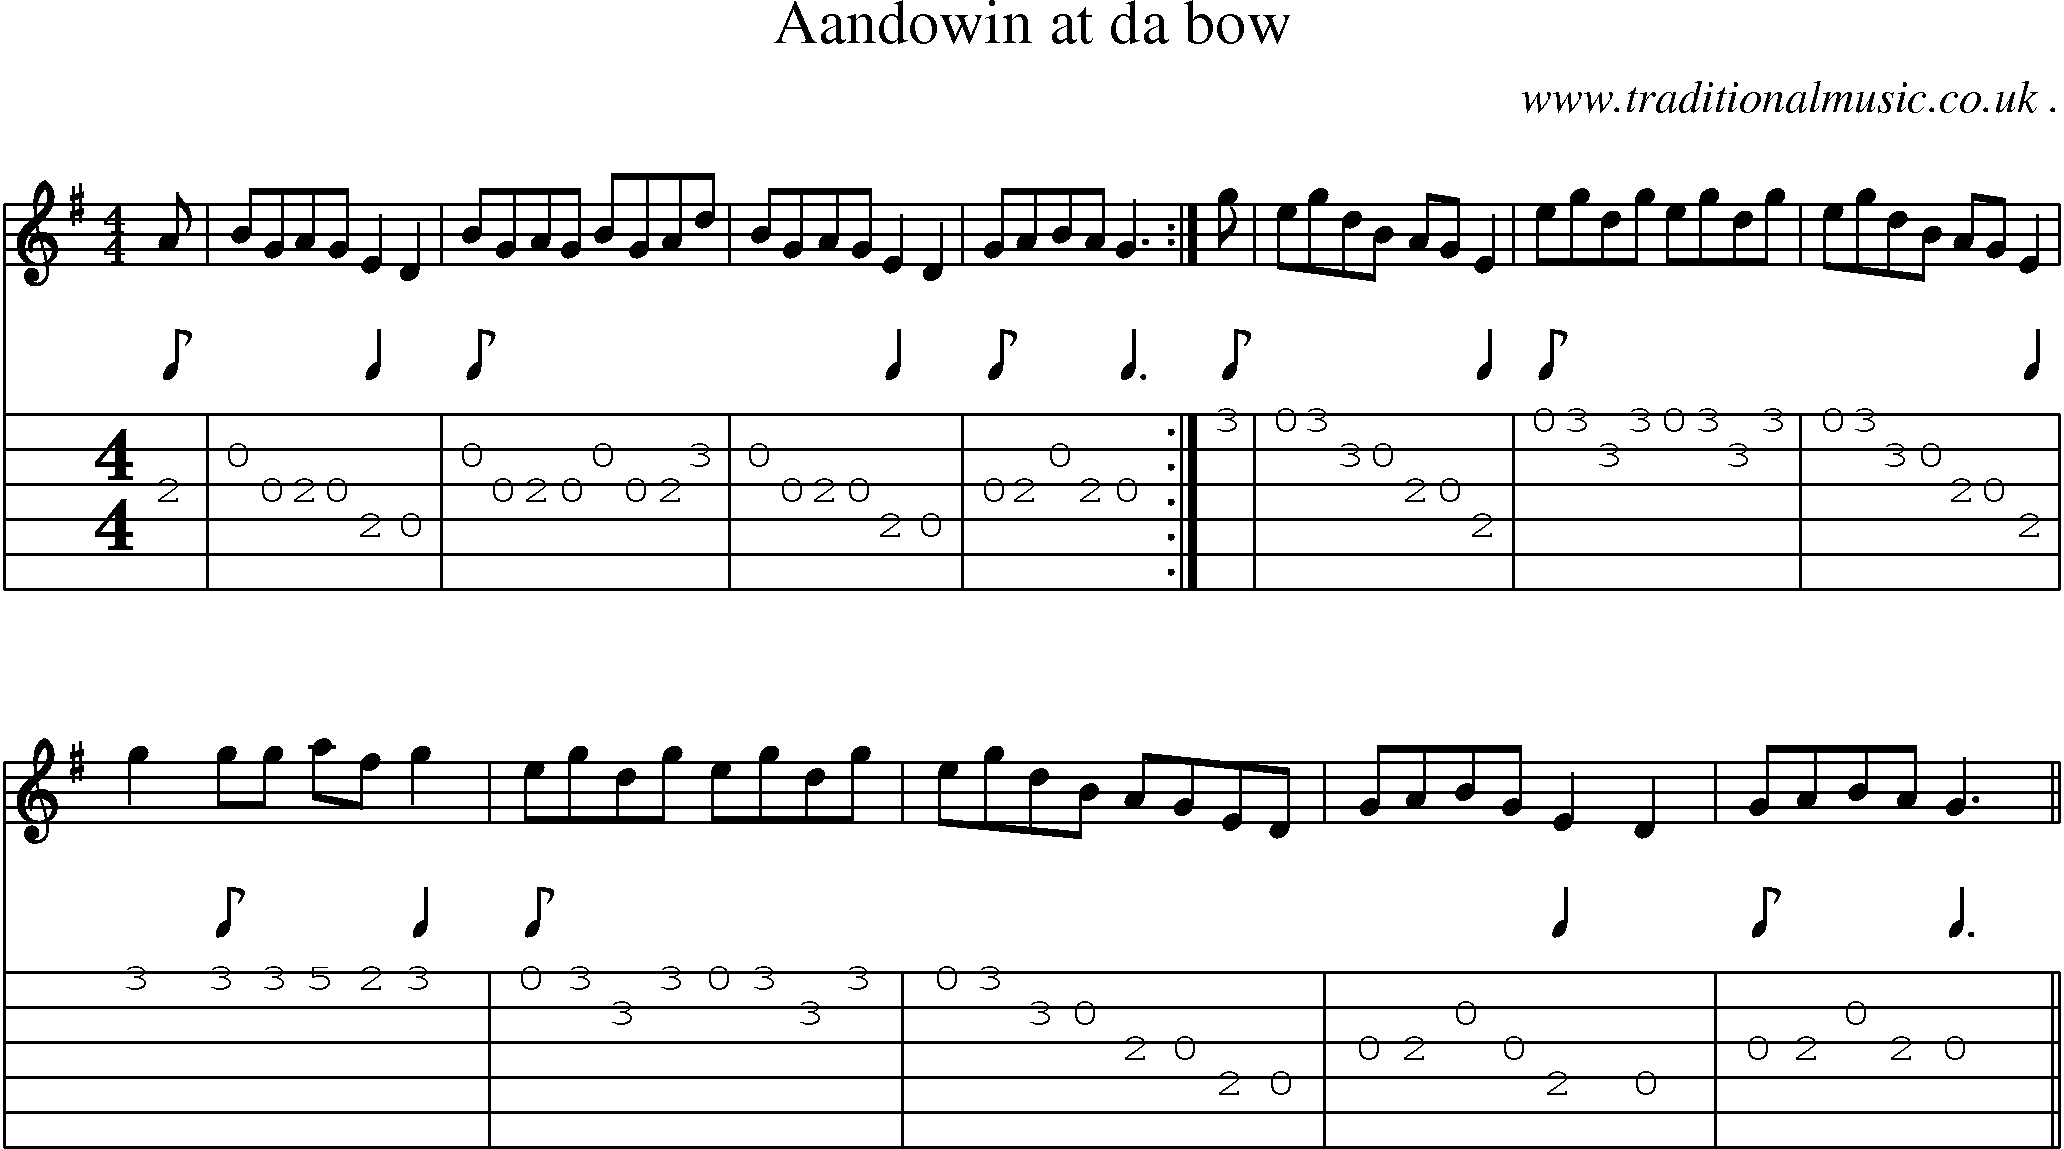 Sheet-music  score, Chords and Guitar Tabs for Aandowin At Da Bow